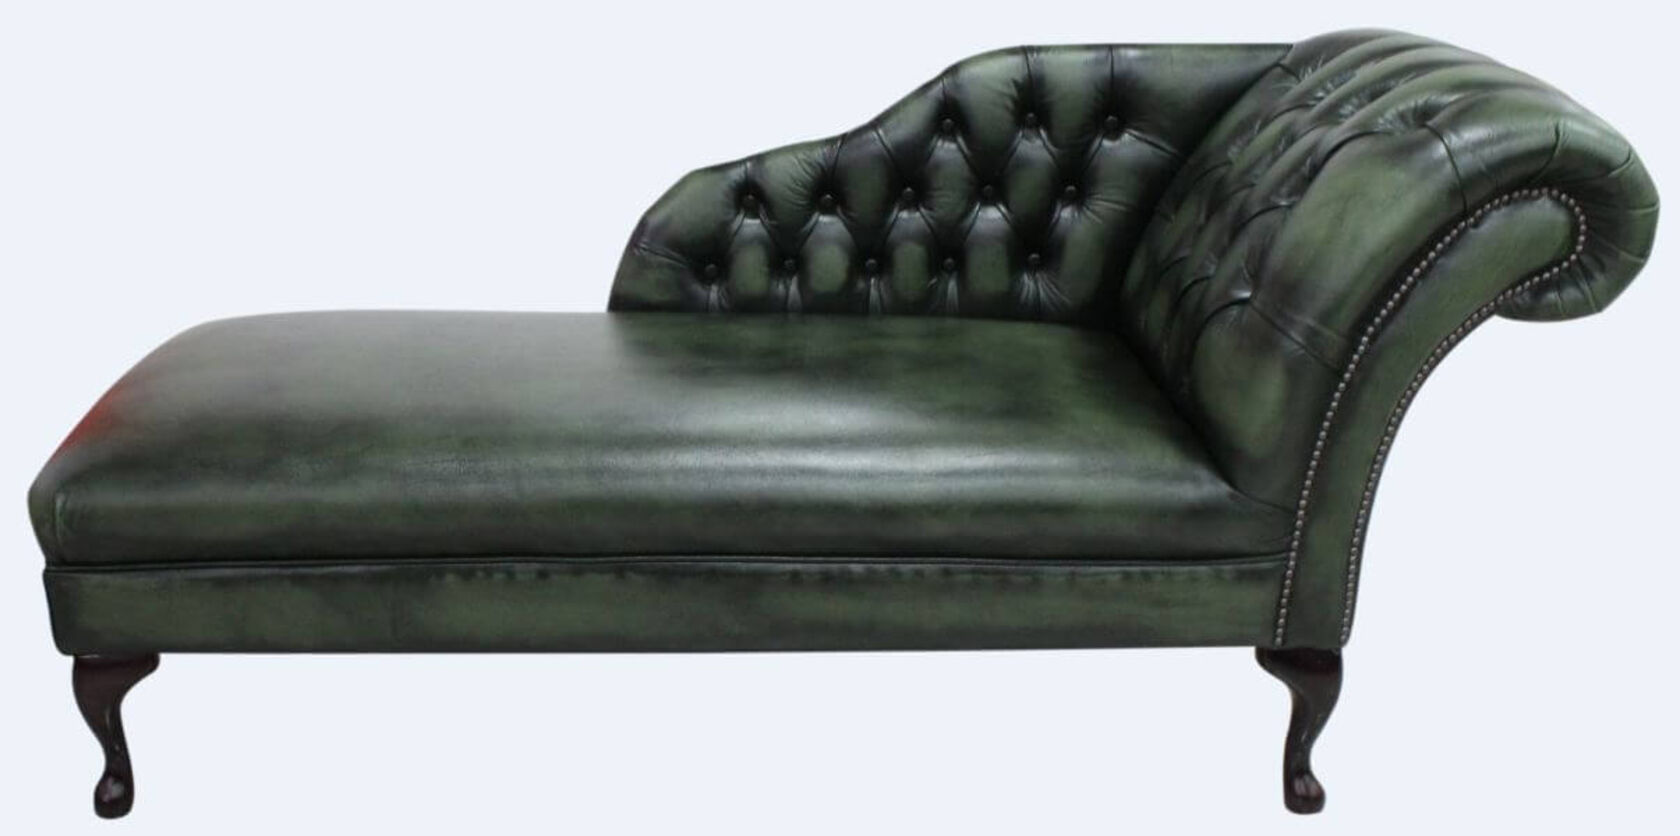 Chesterfield Leather Chaise Lounge Day, Black Leather Chaise Lounge Sofa